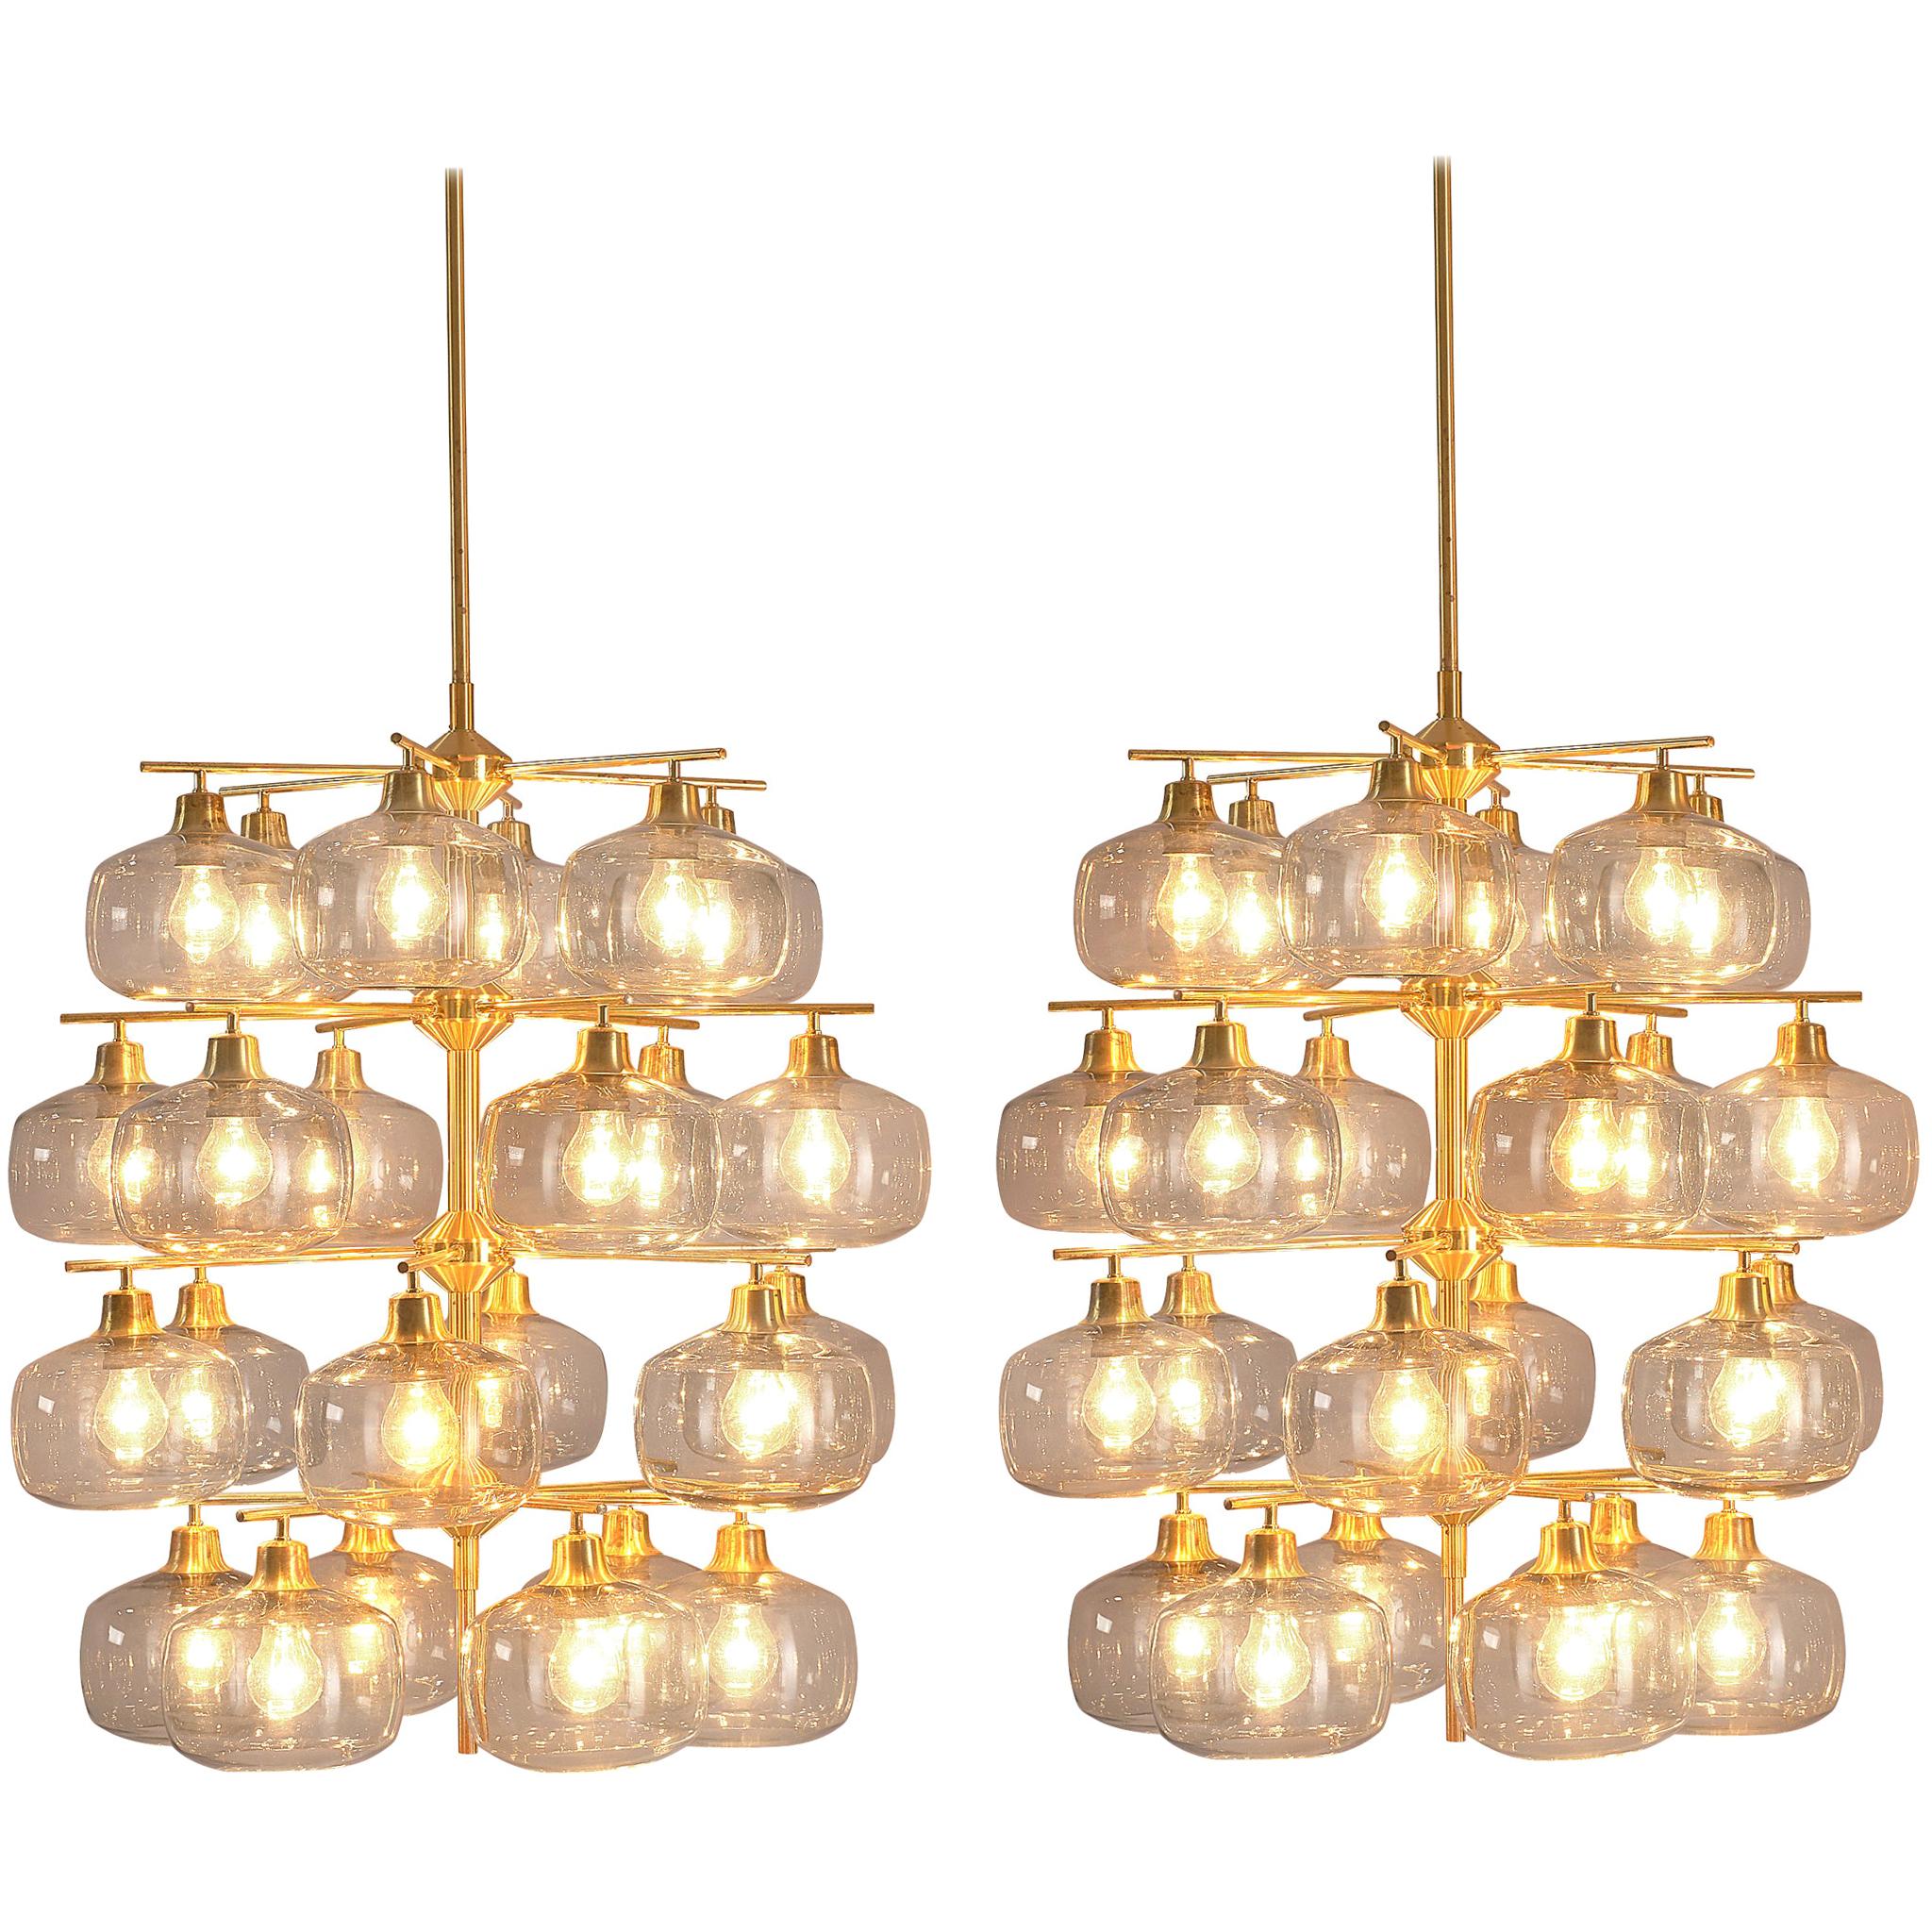 Pair of Swedish Chandeliers by Holger Johansson, 1952